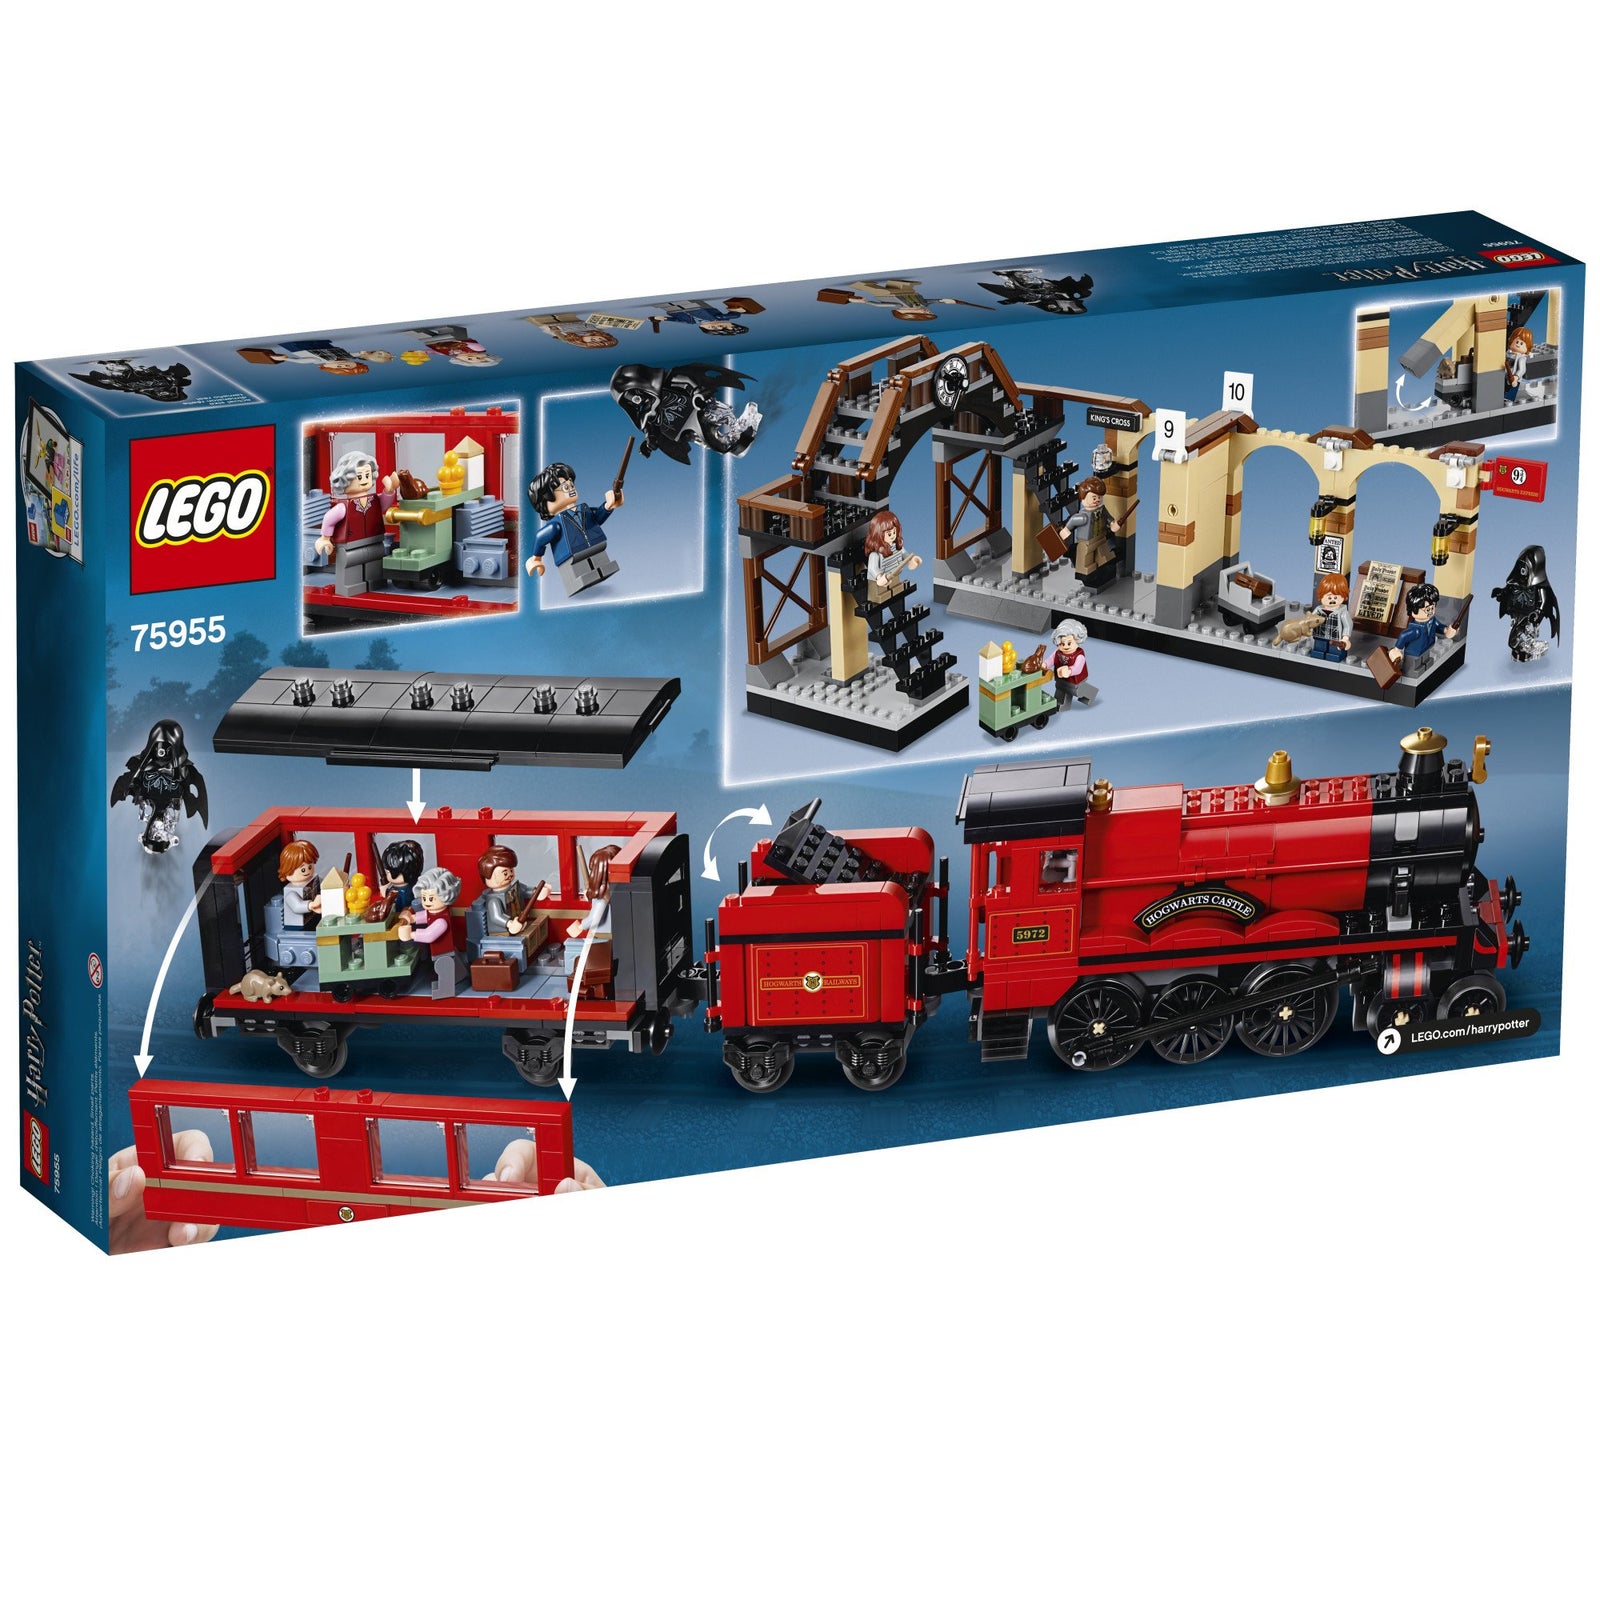 LEGO Harry Potter Hogwarts Express 75955 Toy Train Building Set Includes Model Train and Harry Potter Minifigures Hermione Granger and Ron Weasley (801 Pieces)